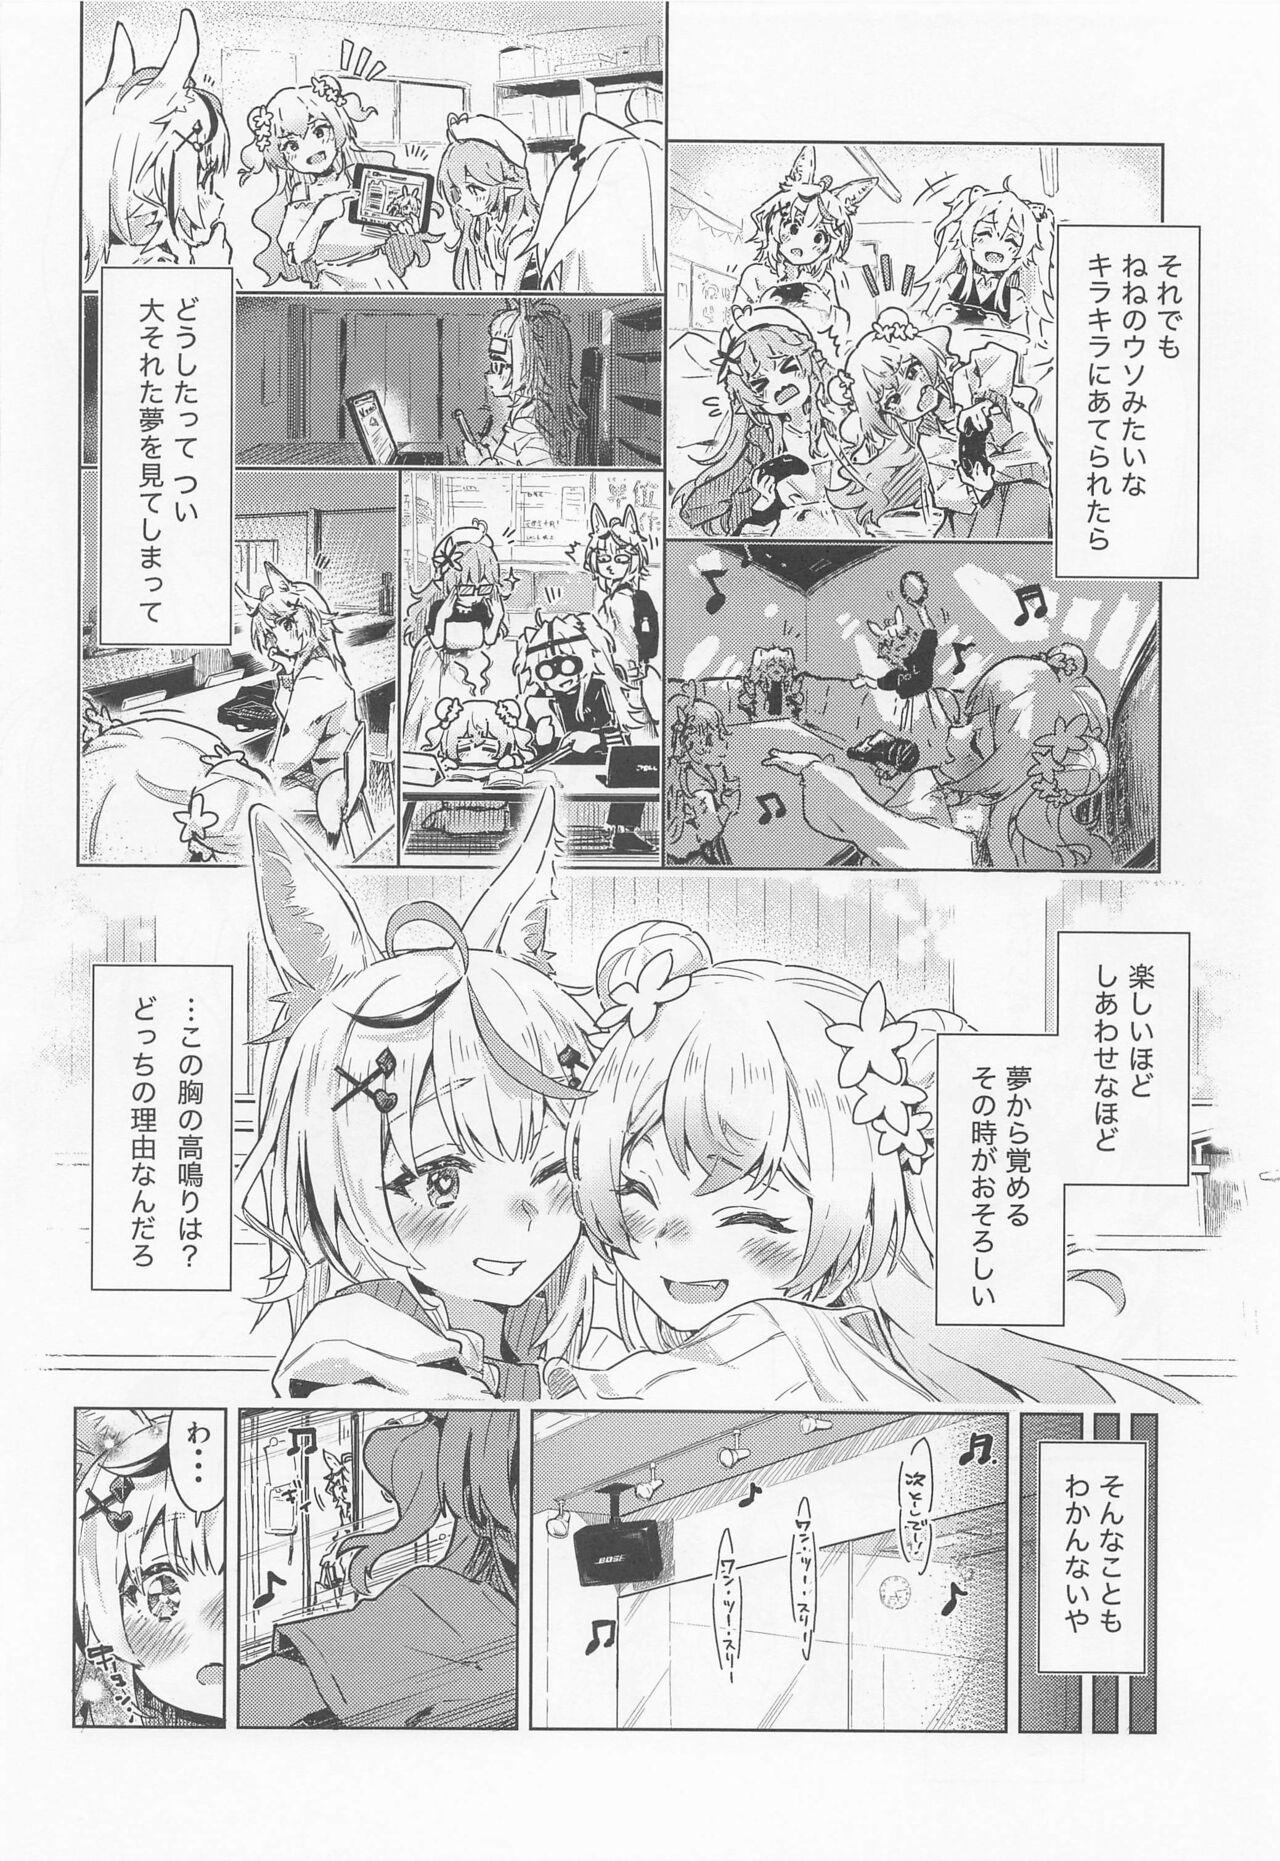 Blond Fennec wa Iseijin no Yume o Miru ka - Does The Fennec Dream of The Lovely Visitor? - Hololive Mamando - Page 5